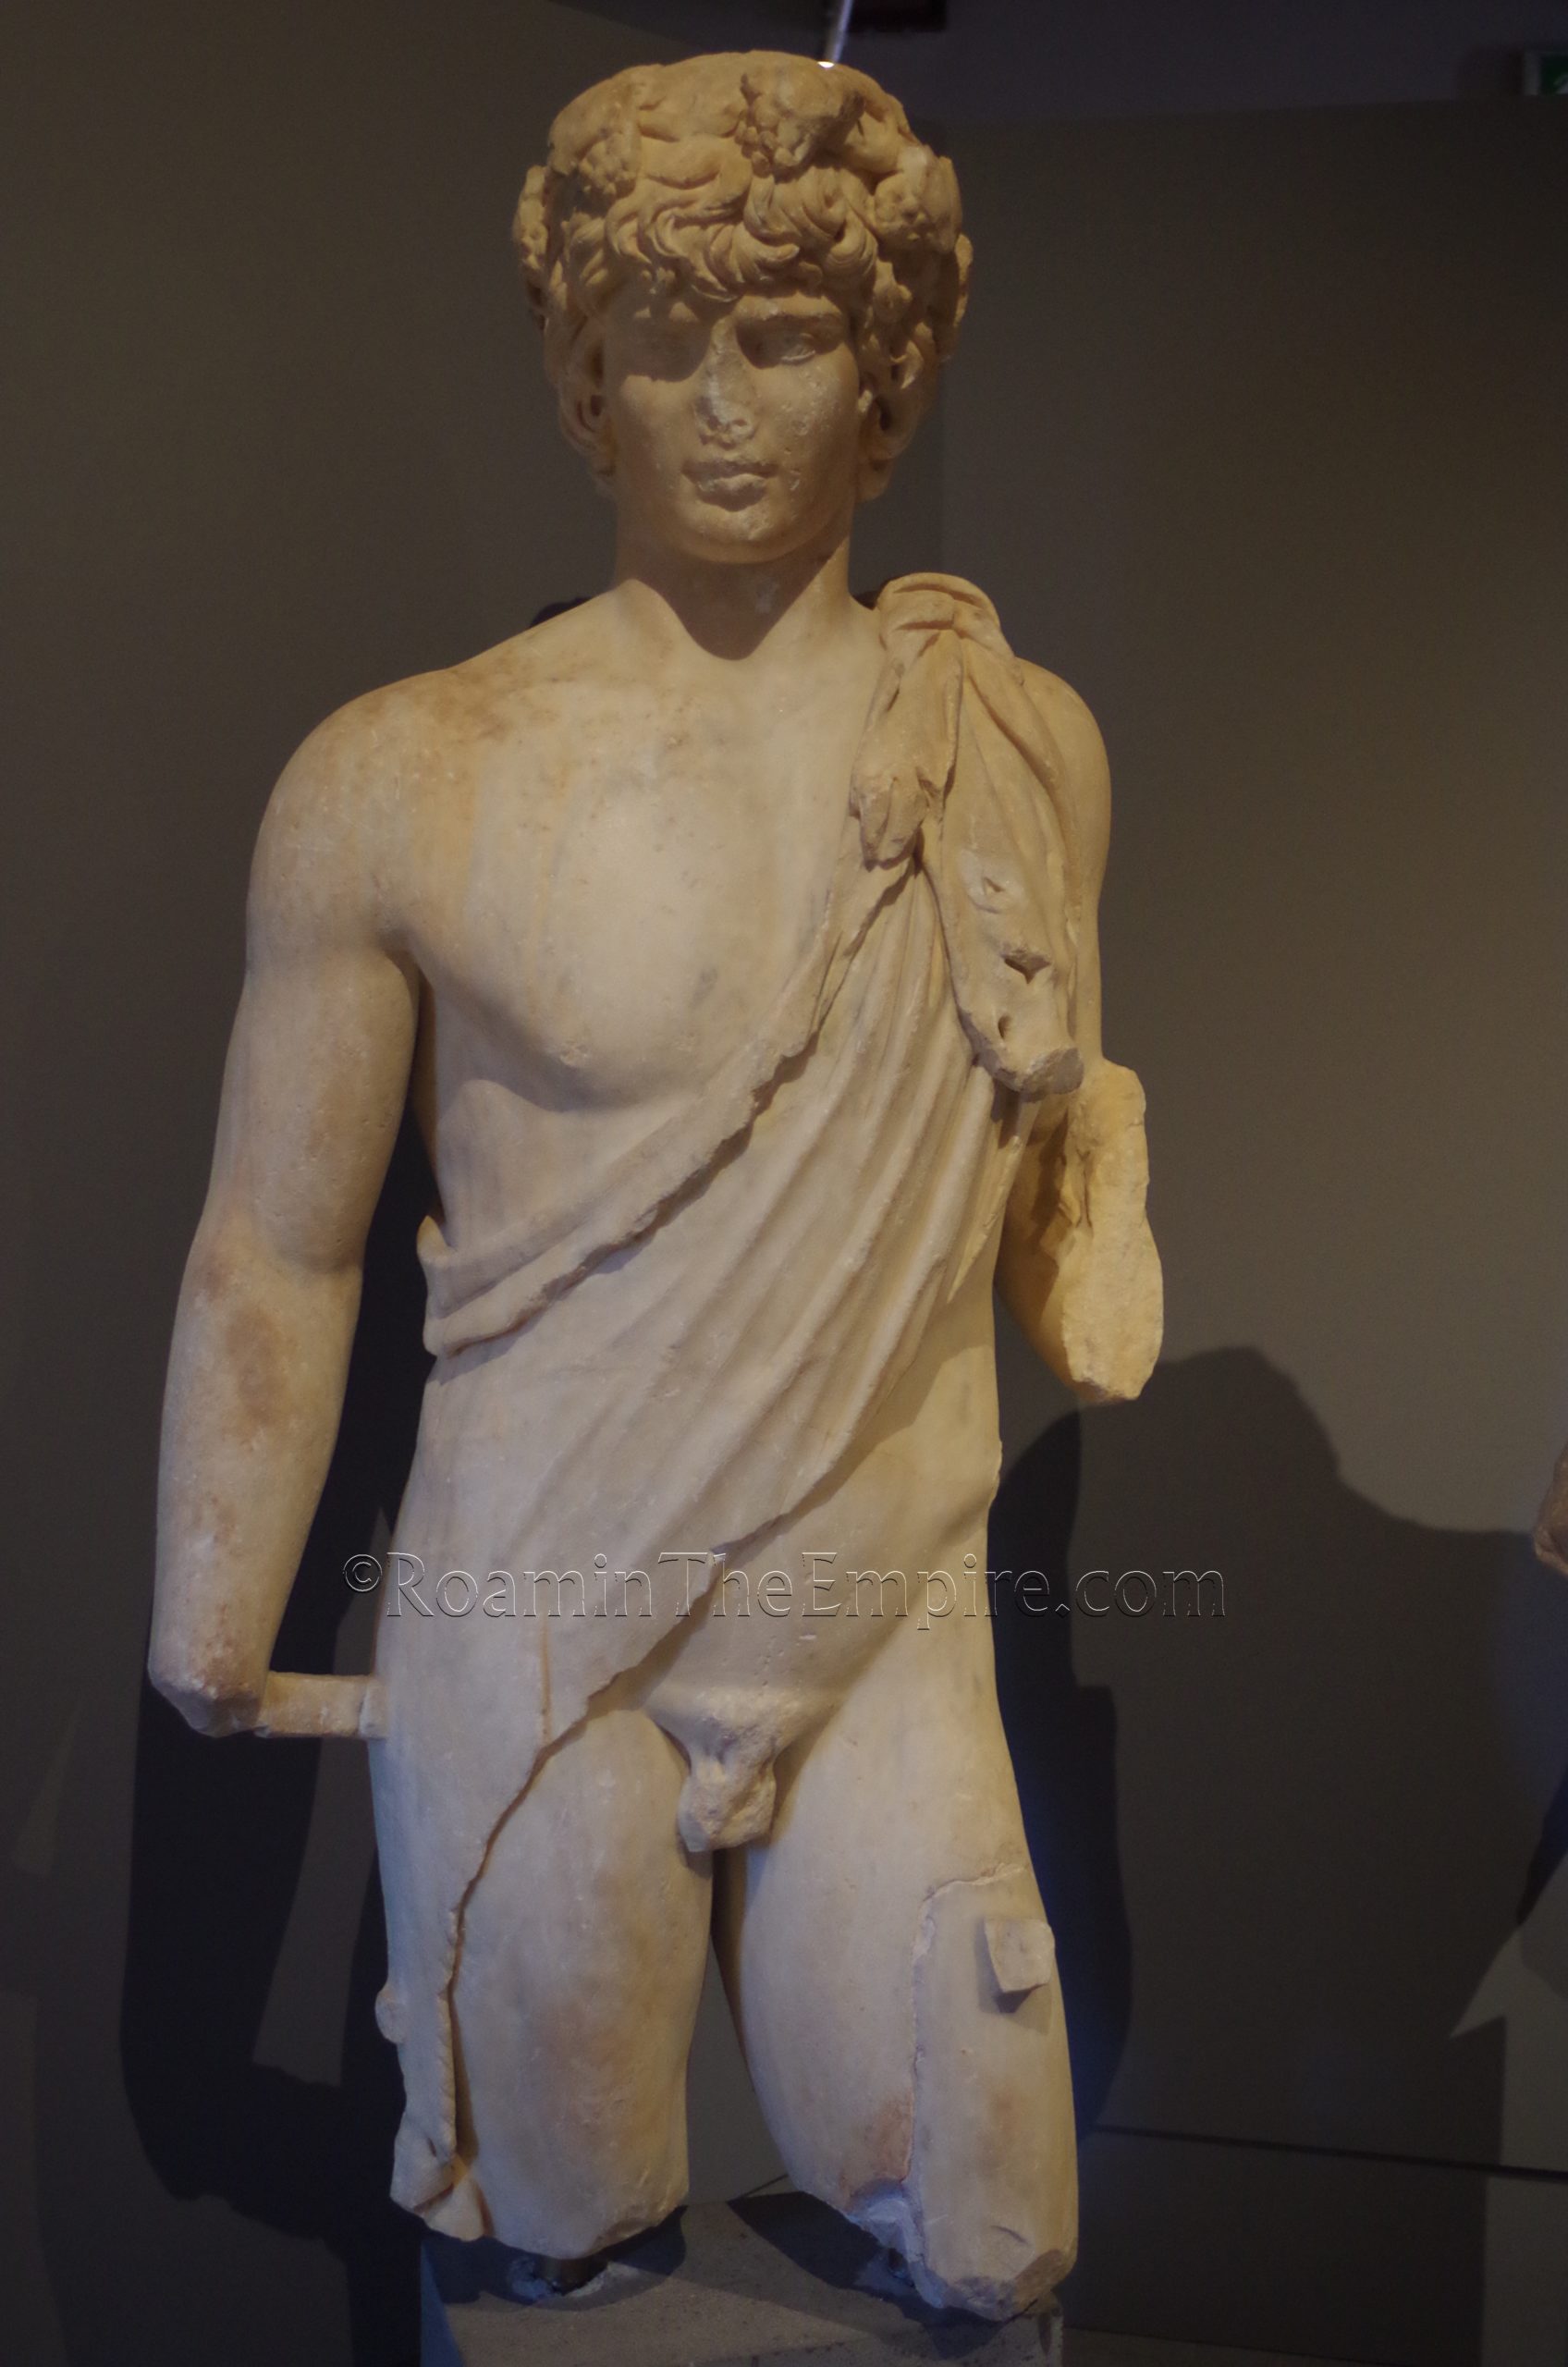 Statue of Antinous as Dionysus. From public baths at Aedepsus. Dated to the 2nd century CE. New Archaeological Museum of Chalkis "Arethousa."